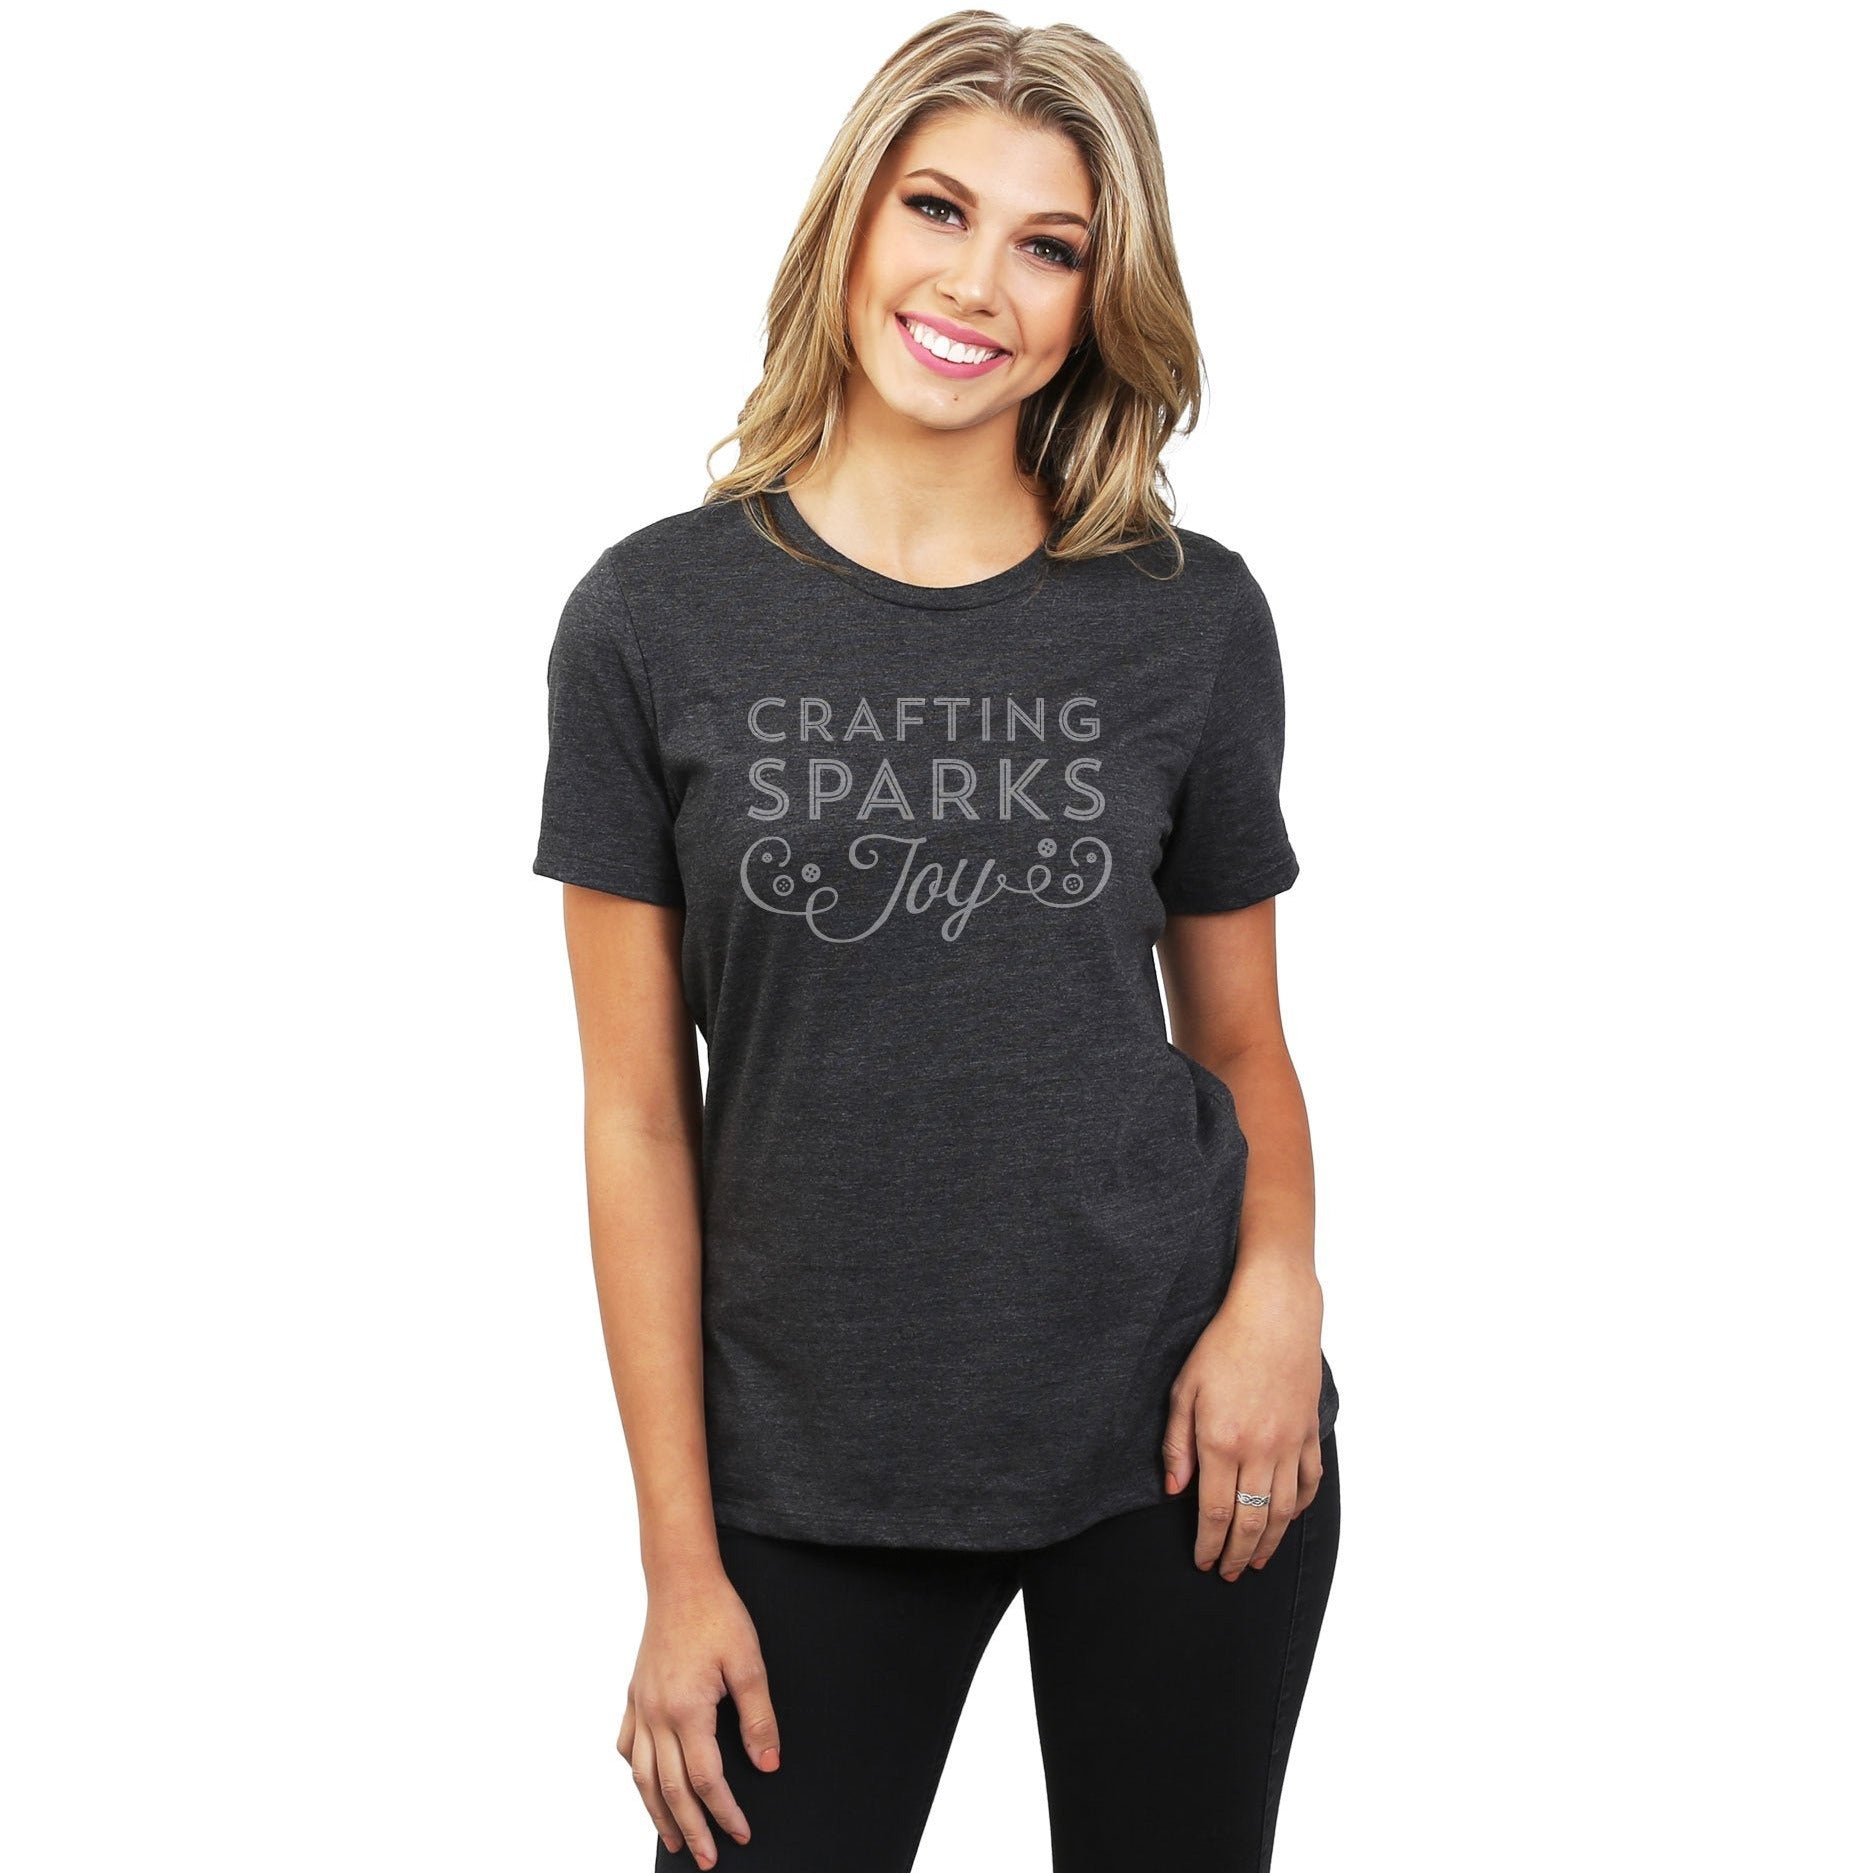 Crafting Sparks Joy Women's Relaxed Crewneck T-Shirt Top Tee Charcoal Model
